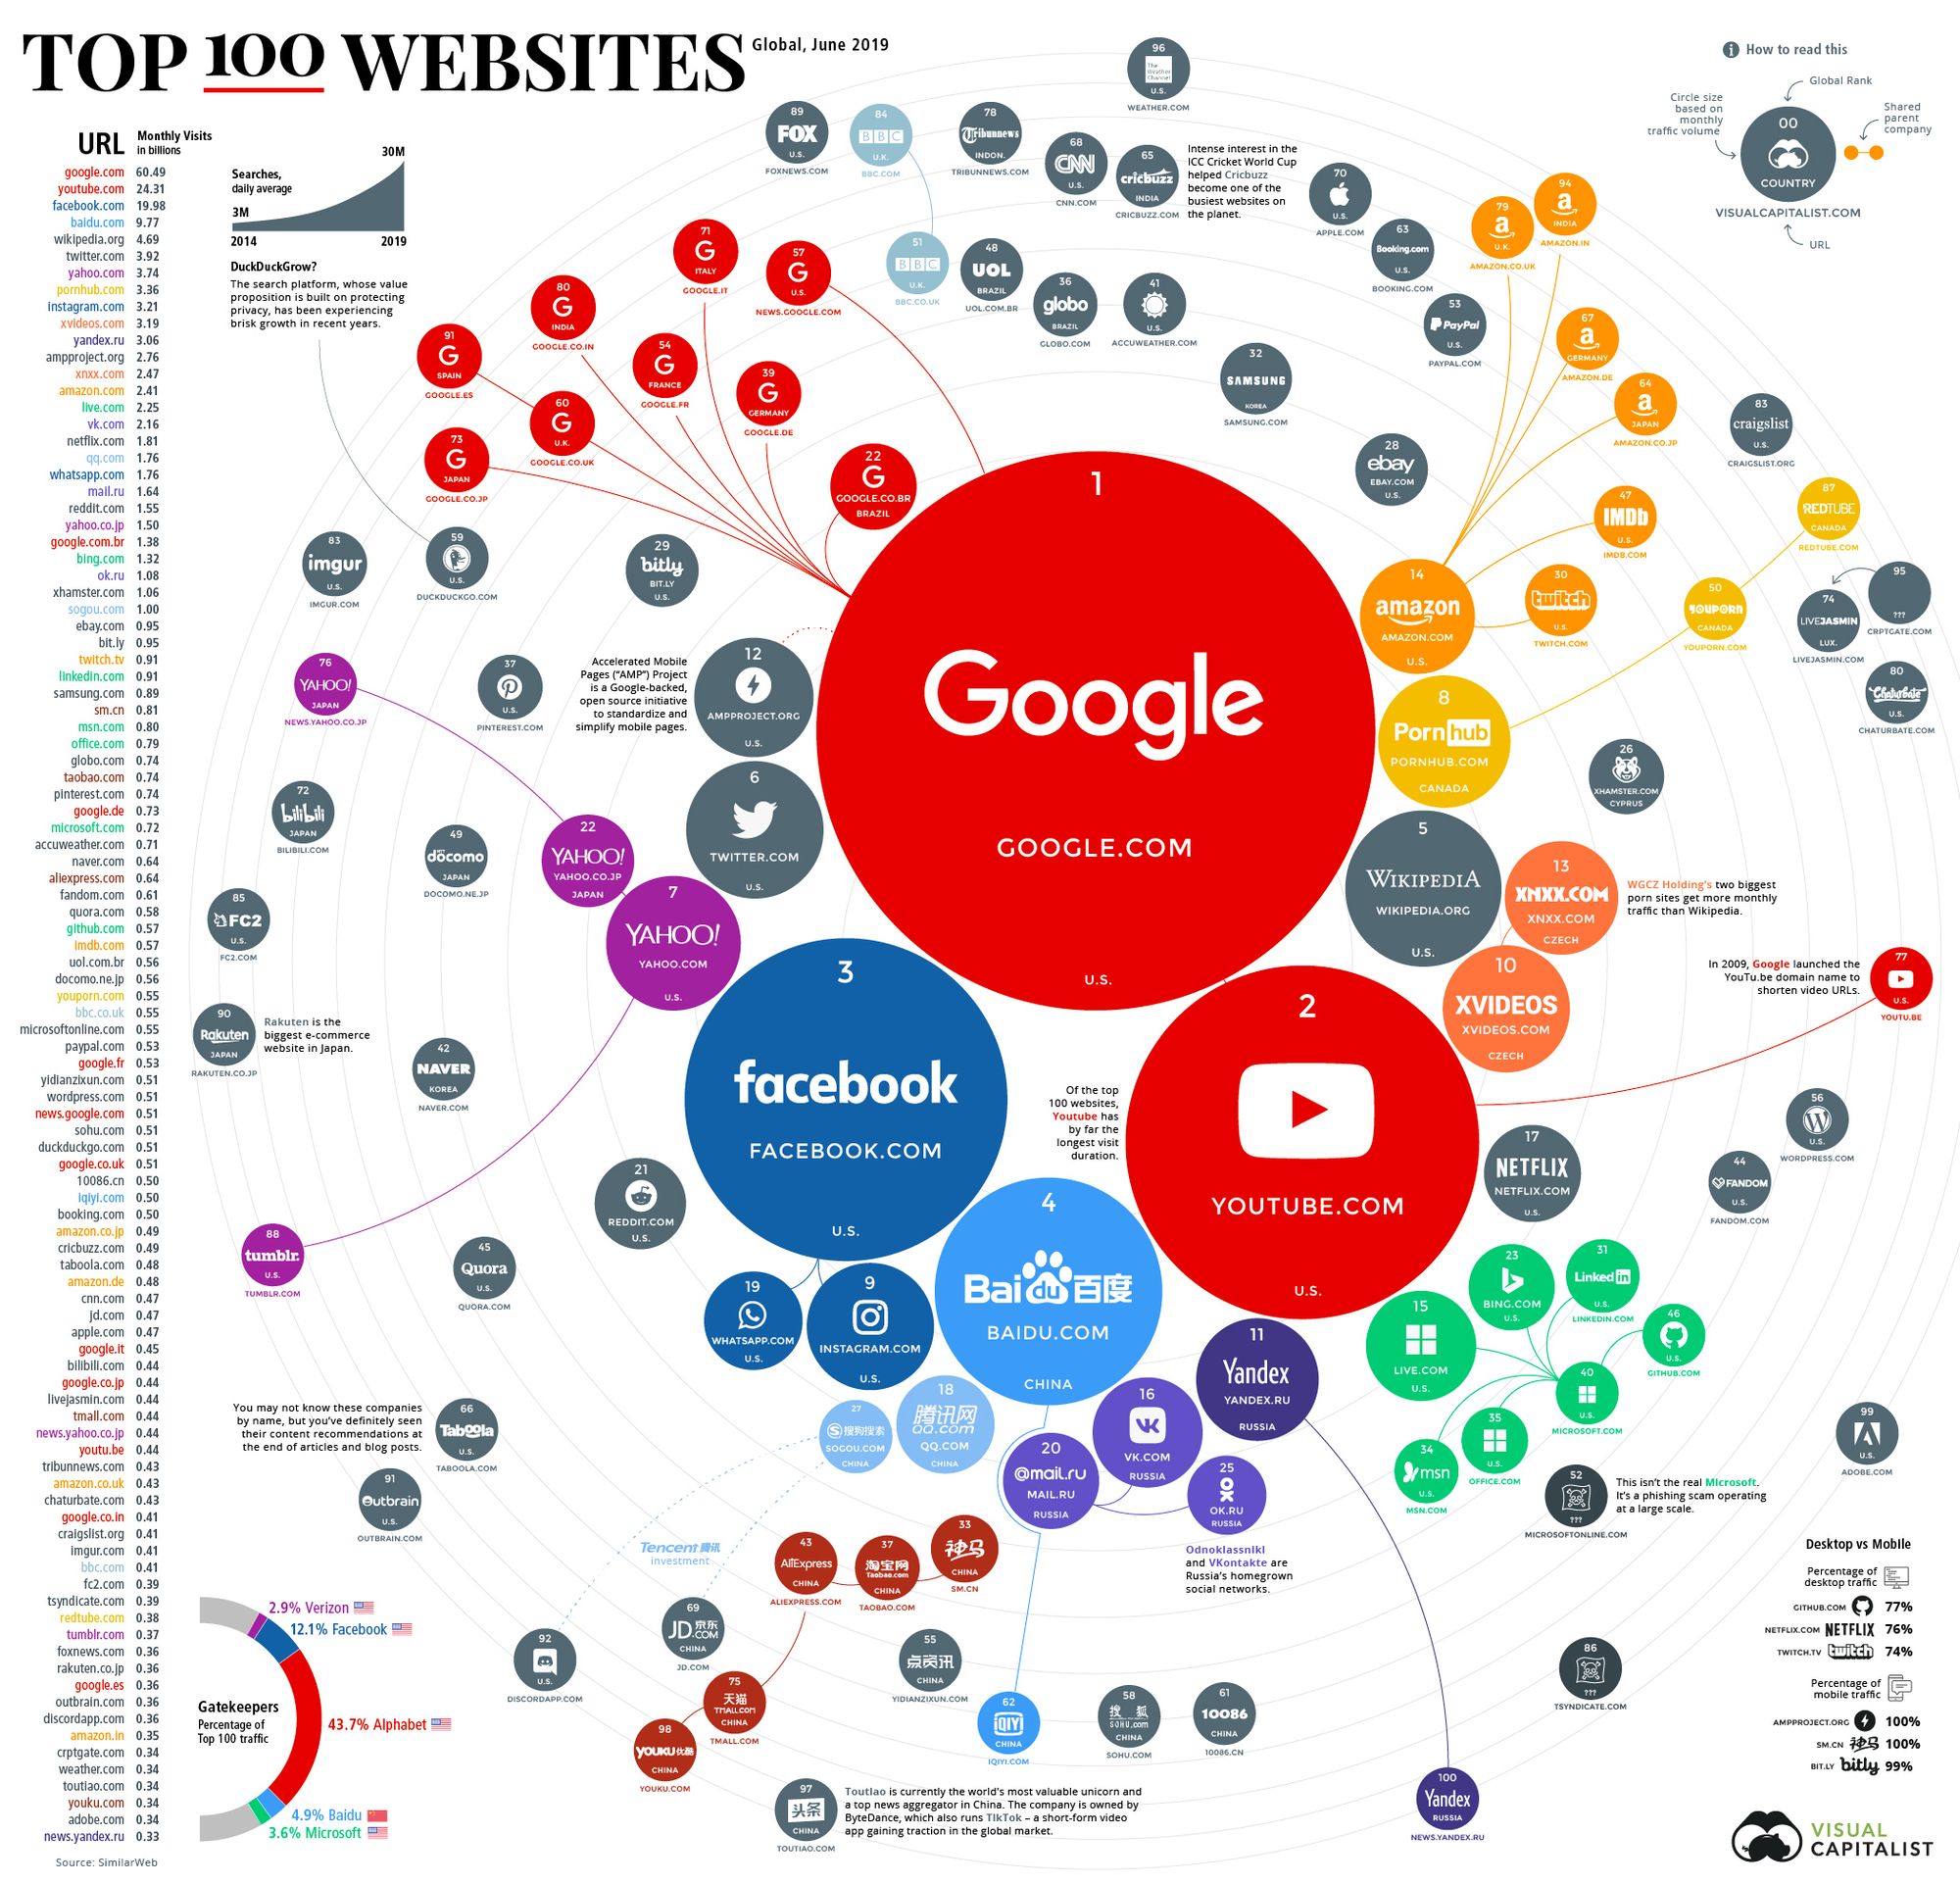 Ranking the Top 100 Websites in the World